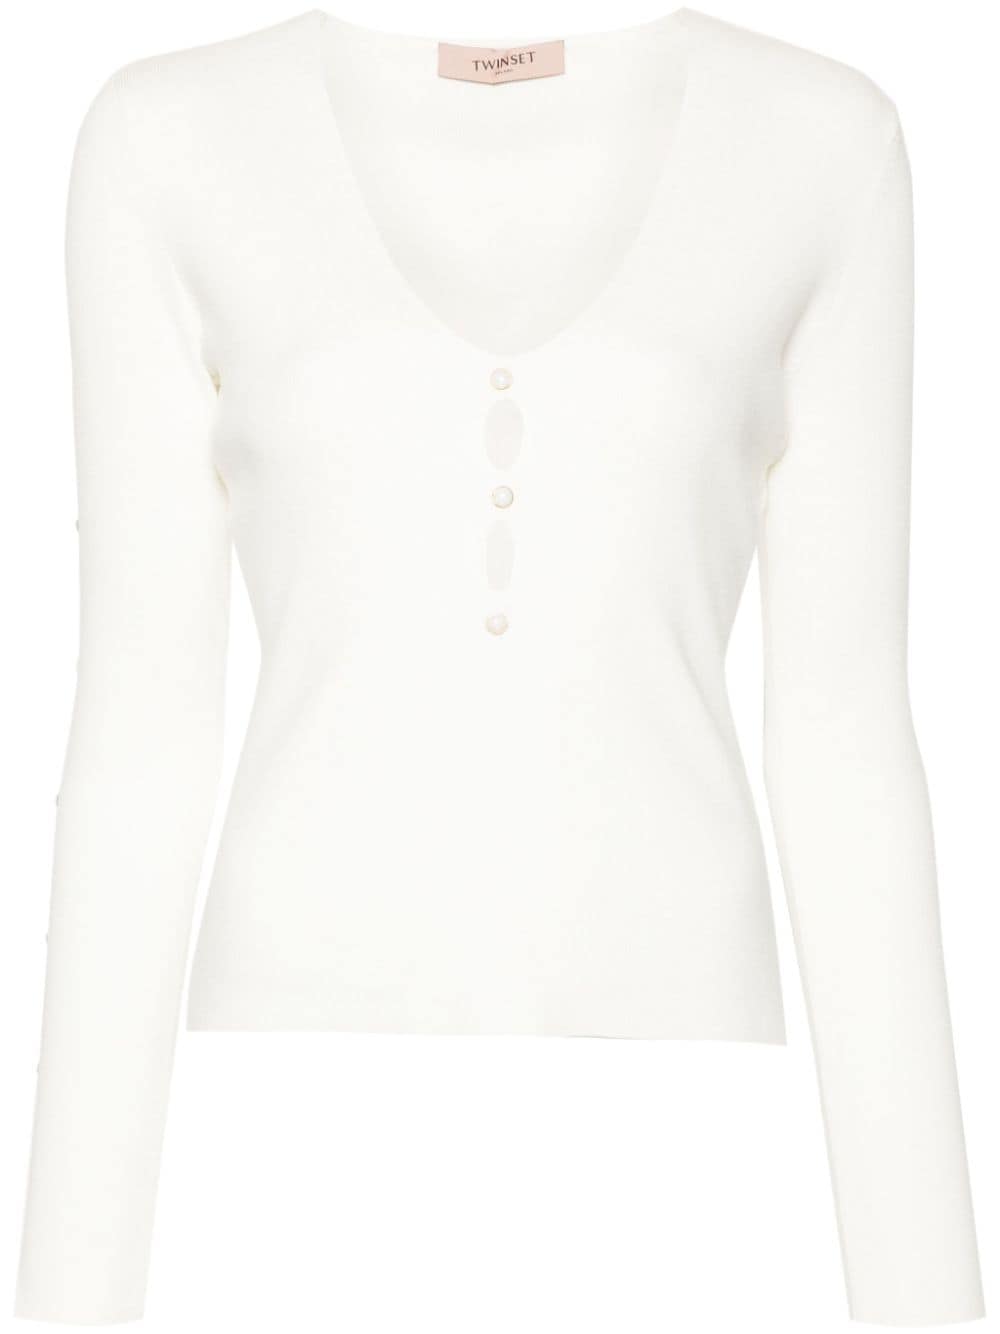 TWINSET cut-out ribbed top - White von TWINSET